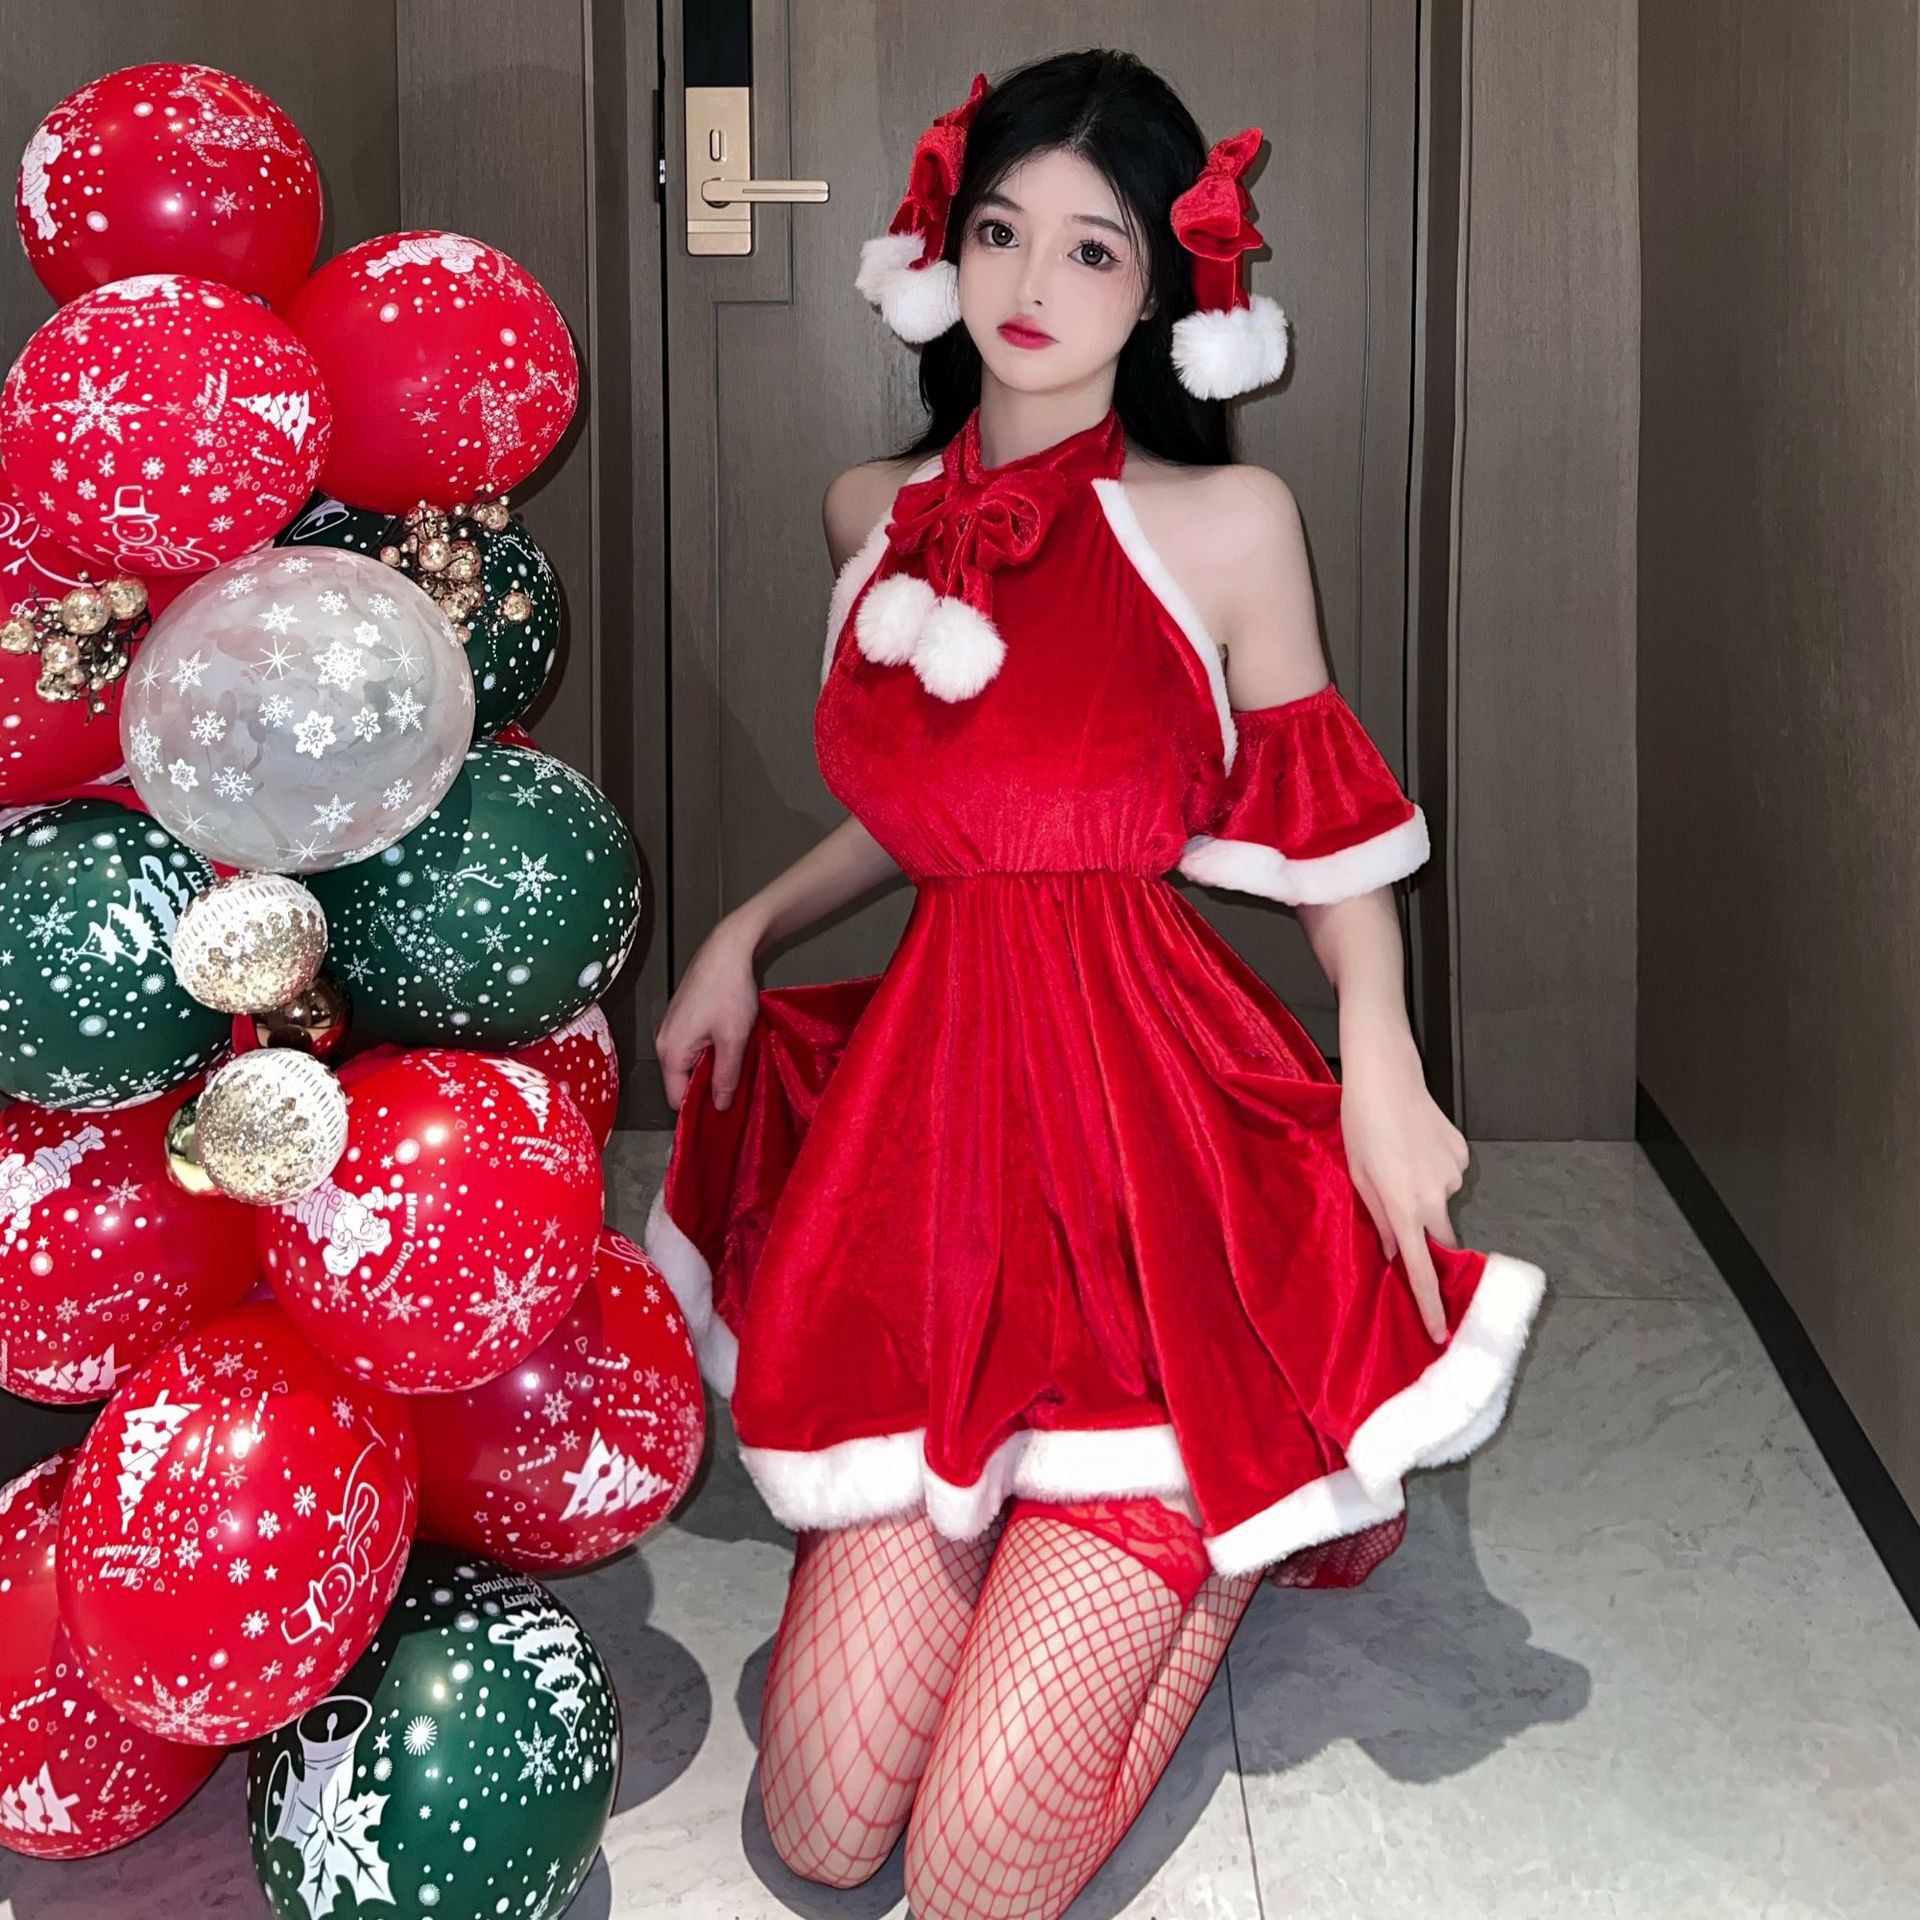 Qinyun New Autumn and Winter Women's Dress Sexy Christmas Hot Girl Uniform Passion Backless Sexy Lingerie 5682